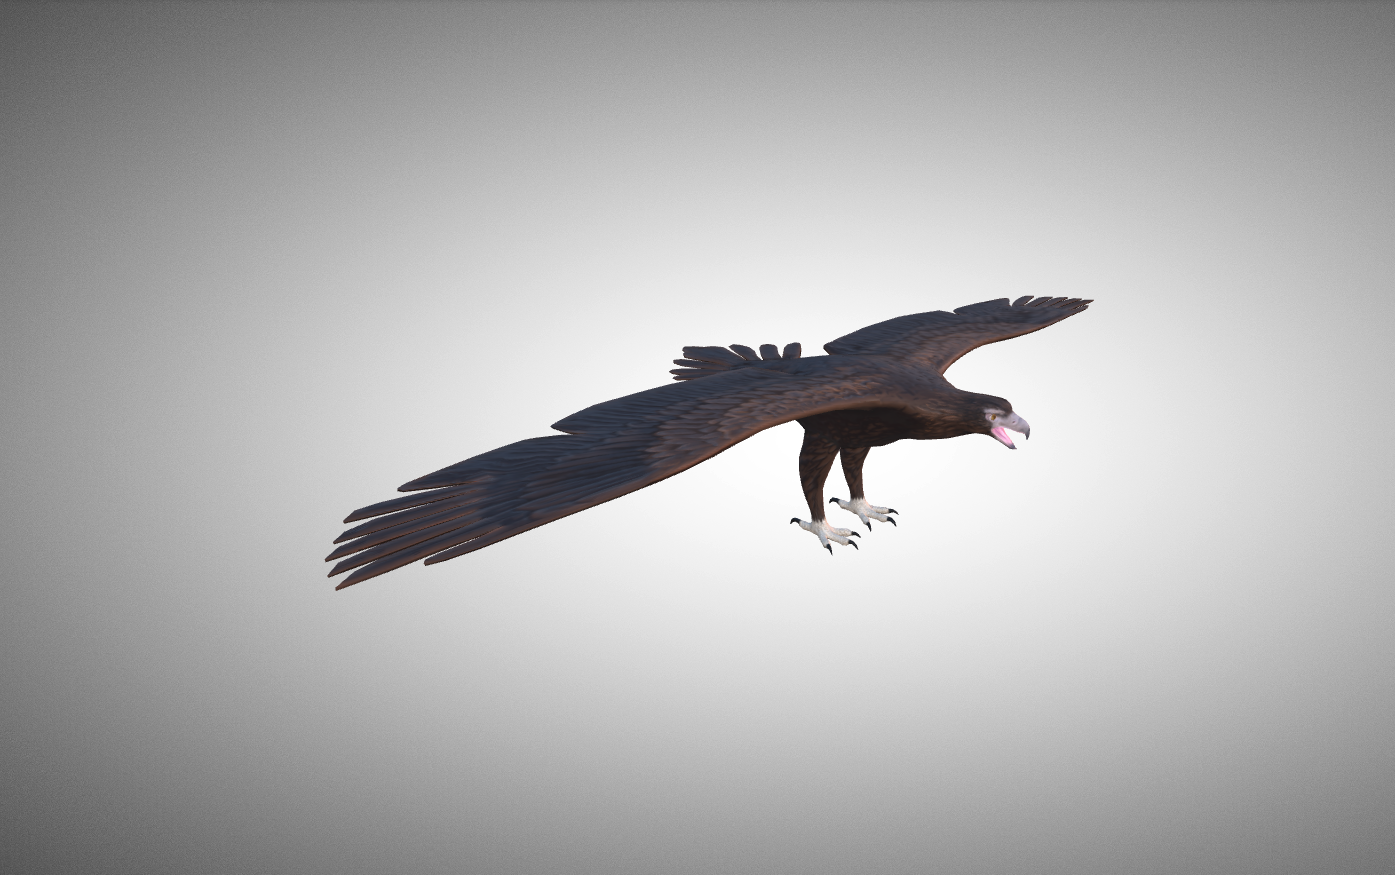 a 3D model of wedge tail eagle on a grey background.